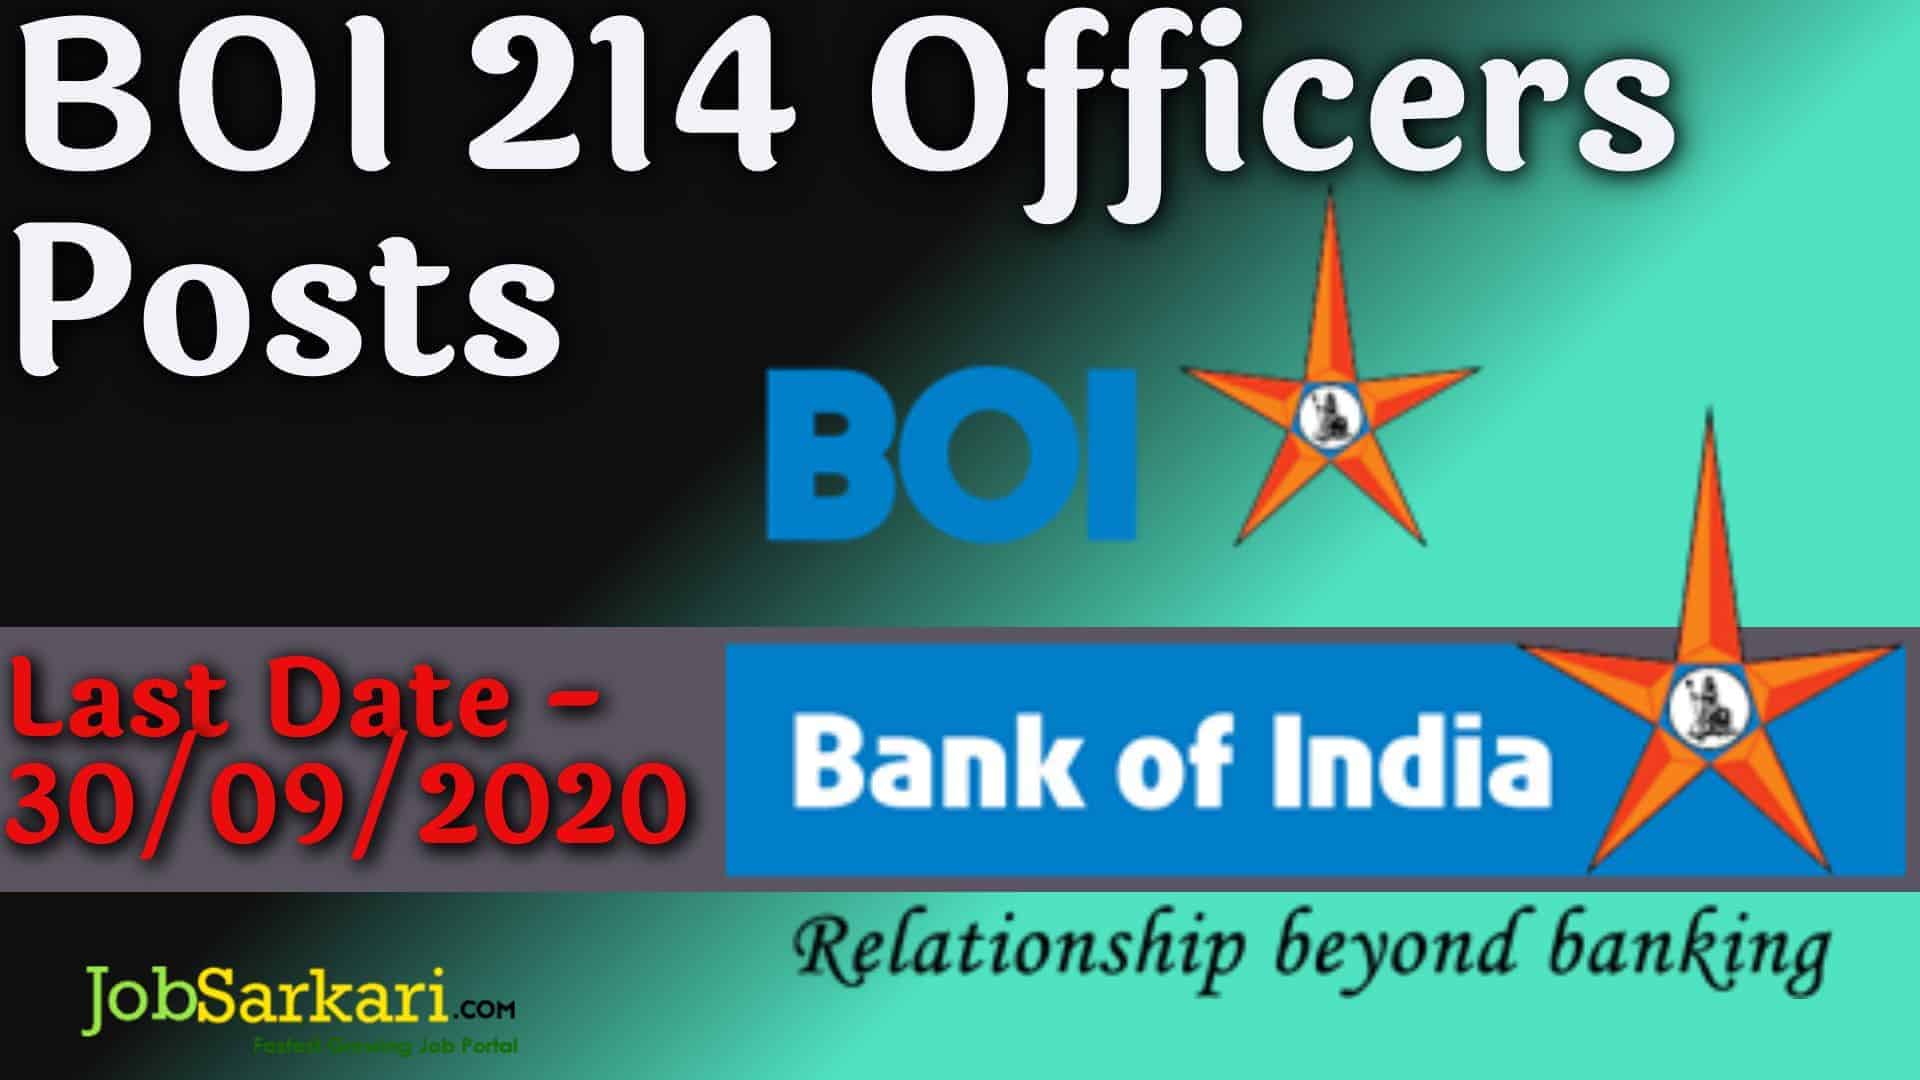 BOI 214 Officers Posts